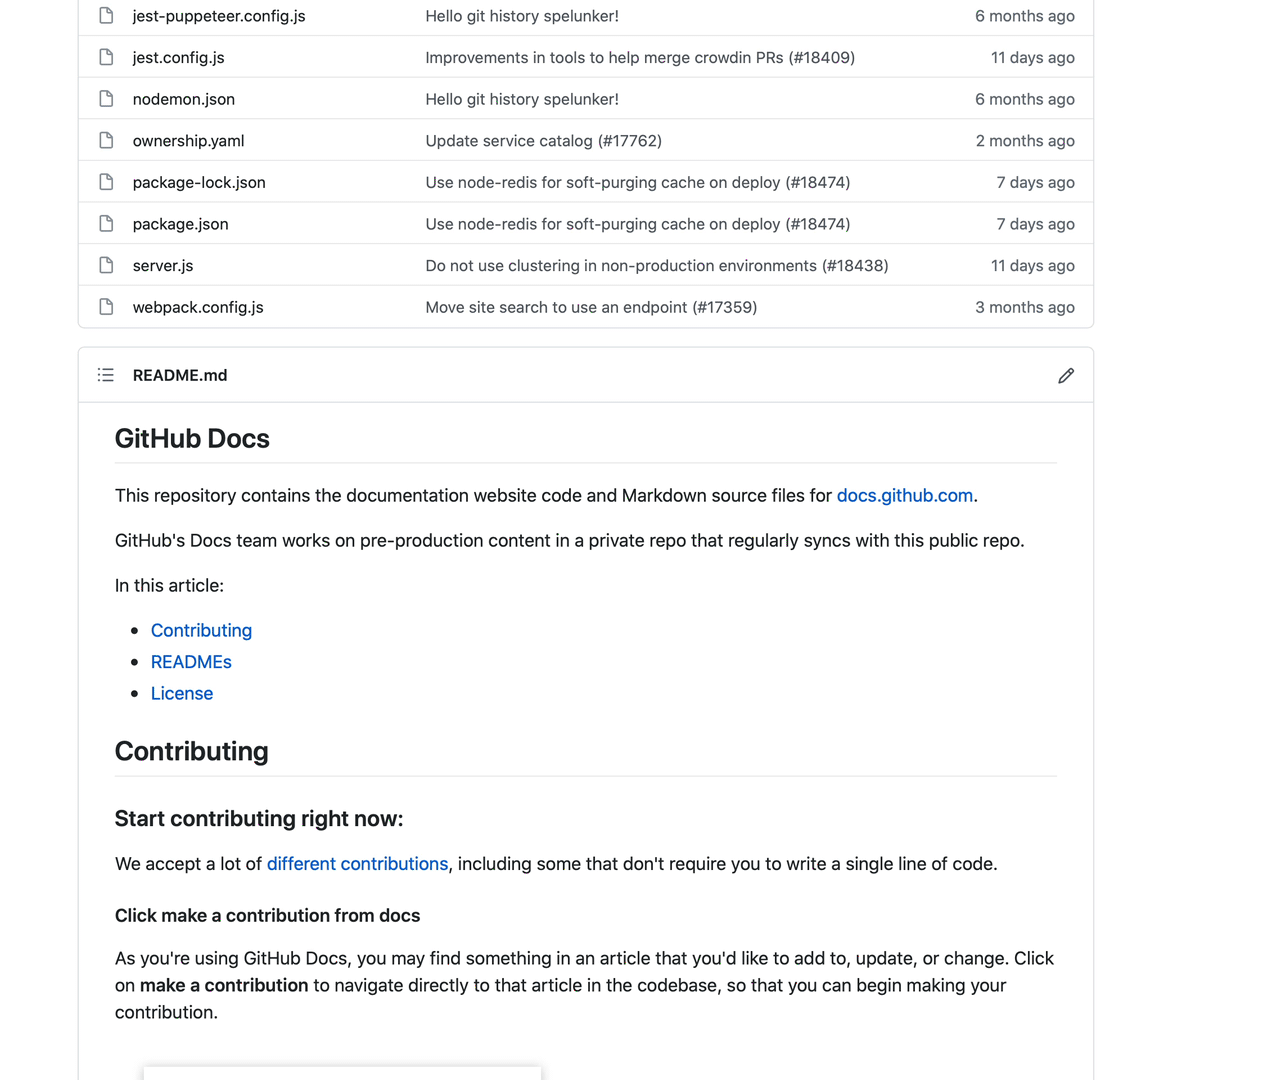 Table of Contents support in Markdown files | GitHub Changelog